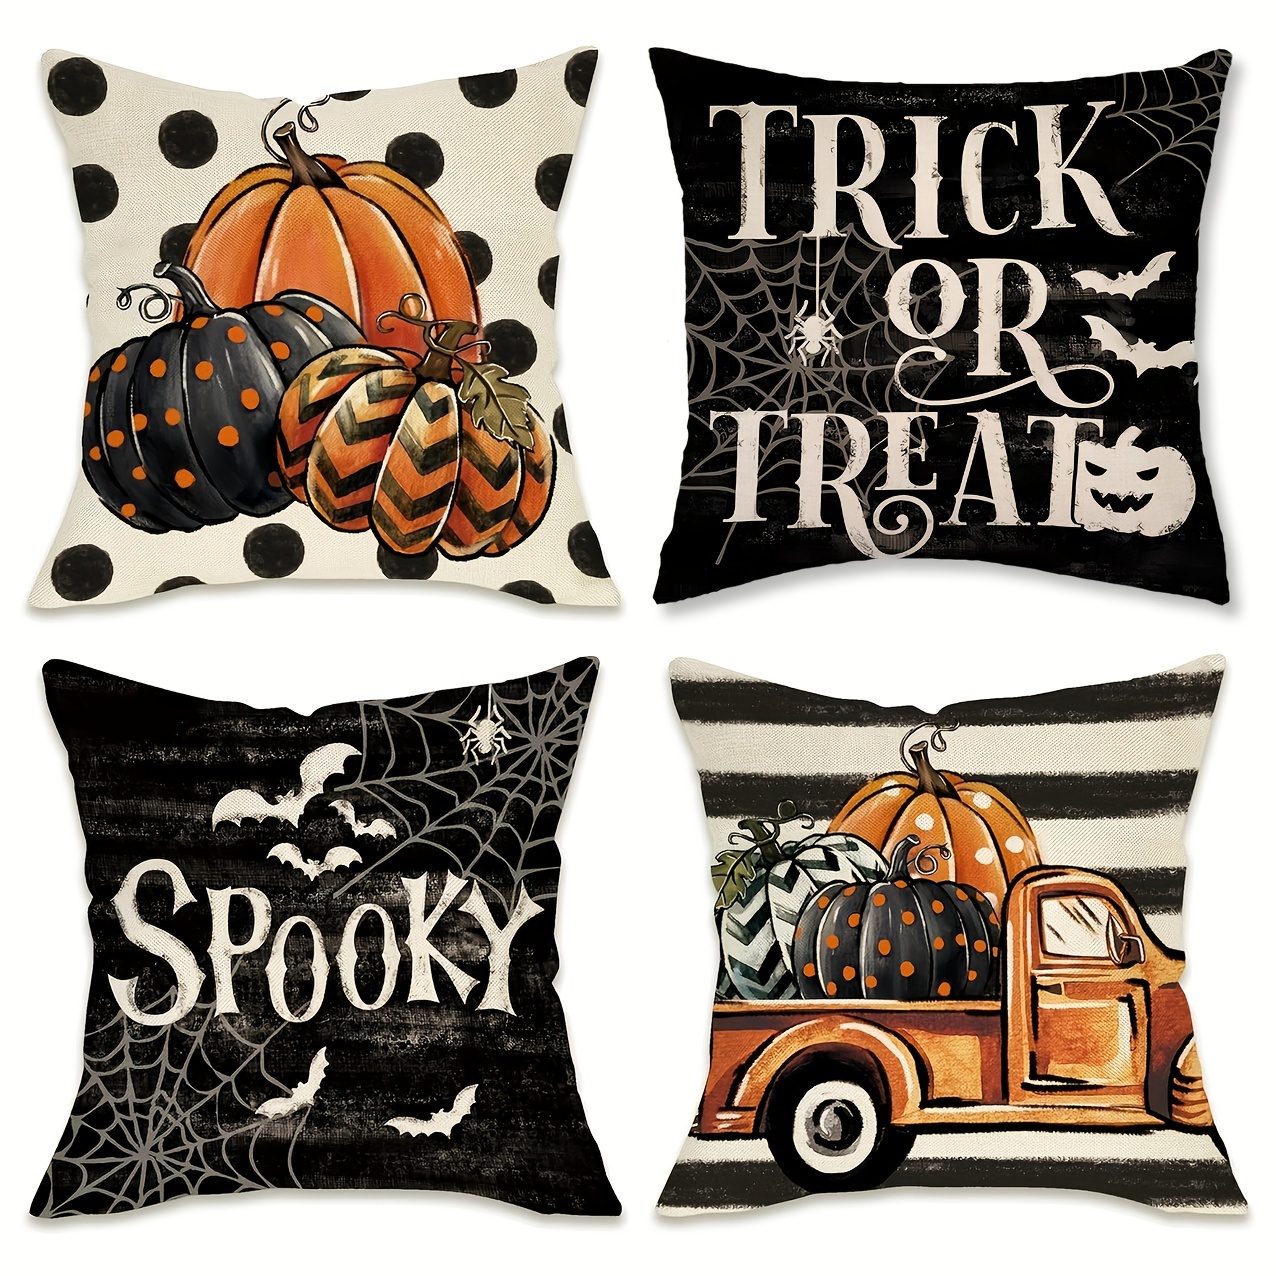 

4-piece Black Buffalo Plaid & Polka Dot Pumpkin Halloween Throw Pillow Covers 18x18 Inch - Zippered, Machine Washable Polyester Cushion Cases For Sofa And Outdoor Decor